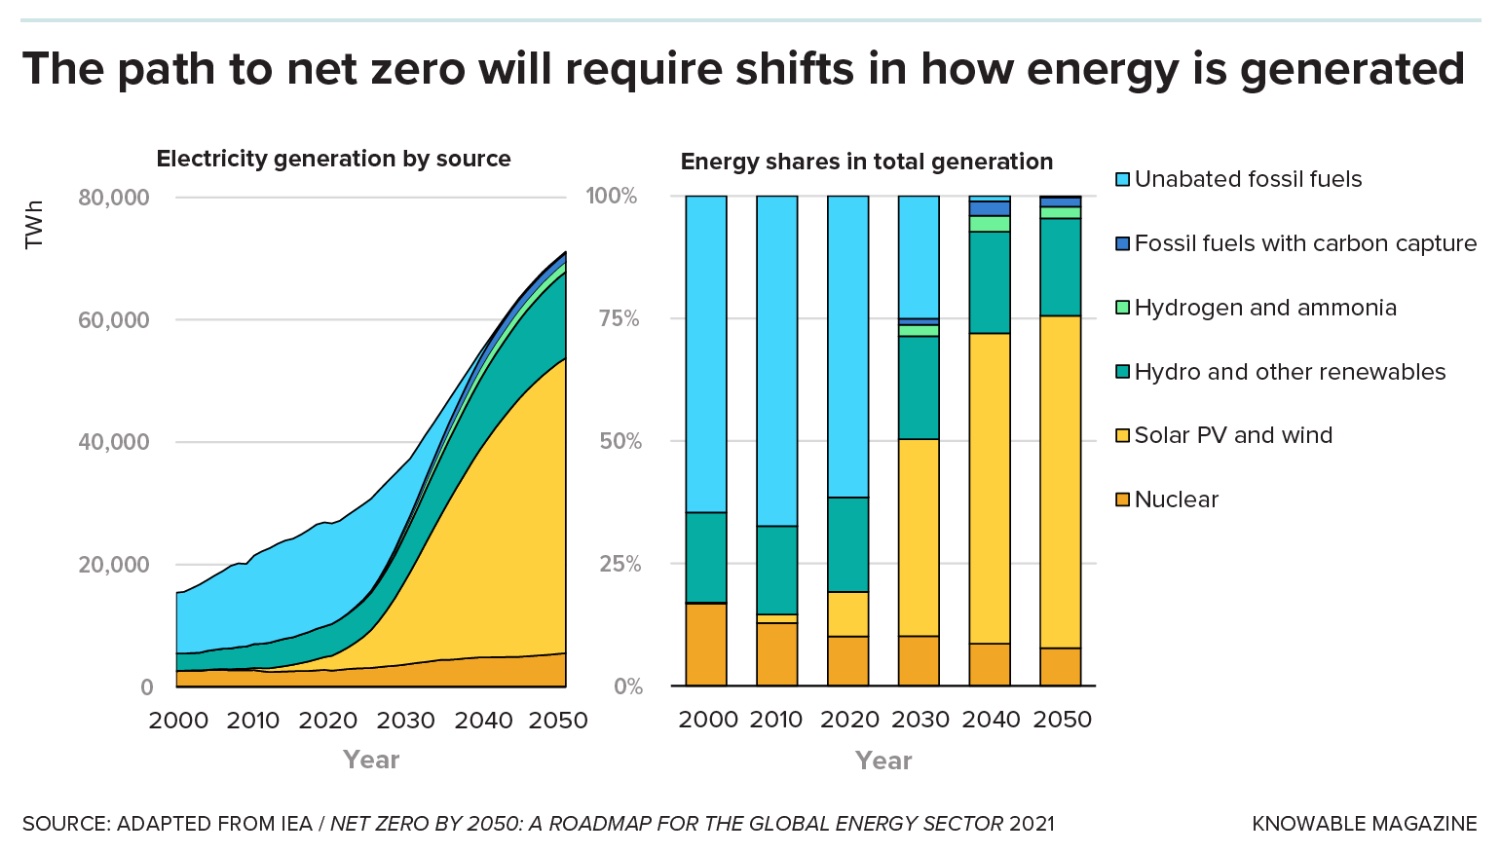 Comparative graphs showing the projected evolution of global electricity generation by source from 2010 to 2050, including nuclear energy, and the required shift in energy sources to reach nuclear net-zero, based